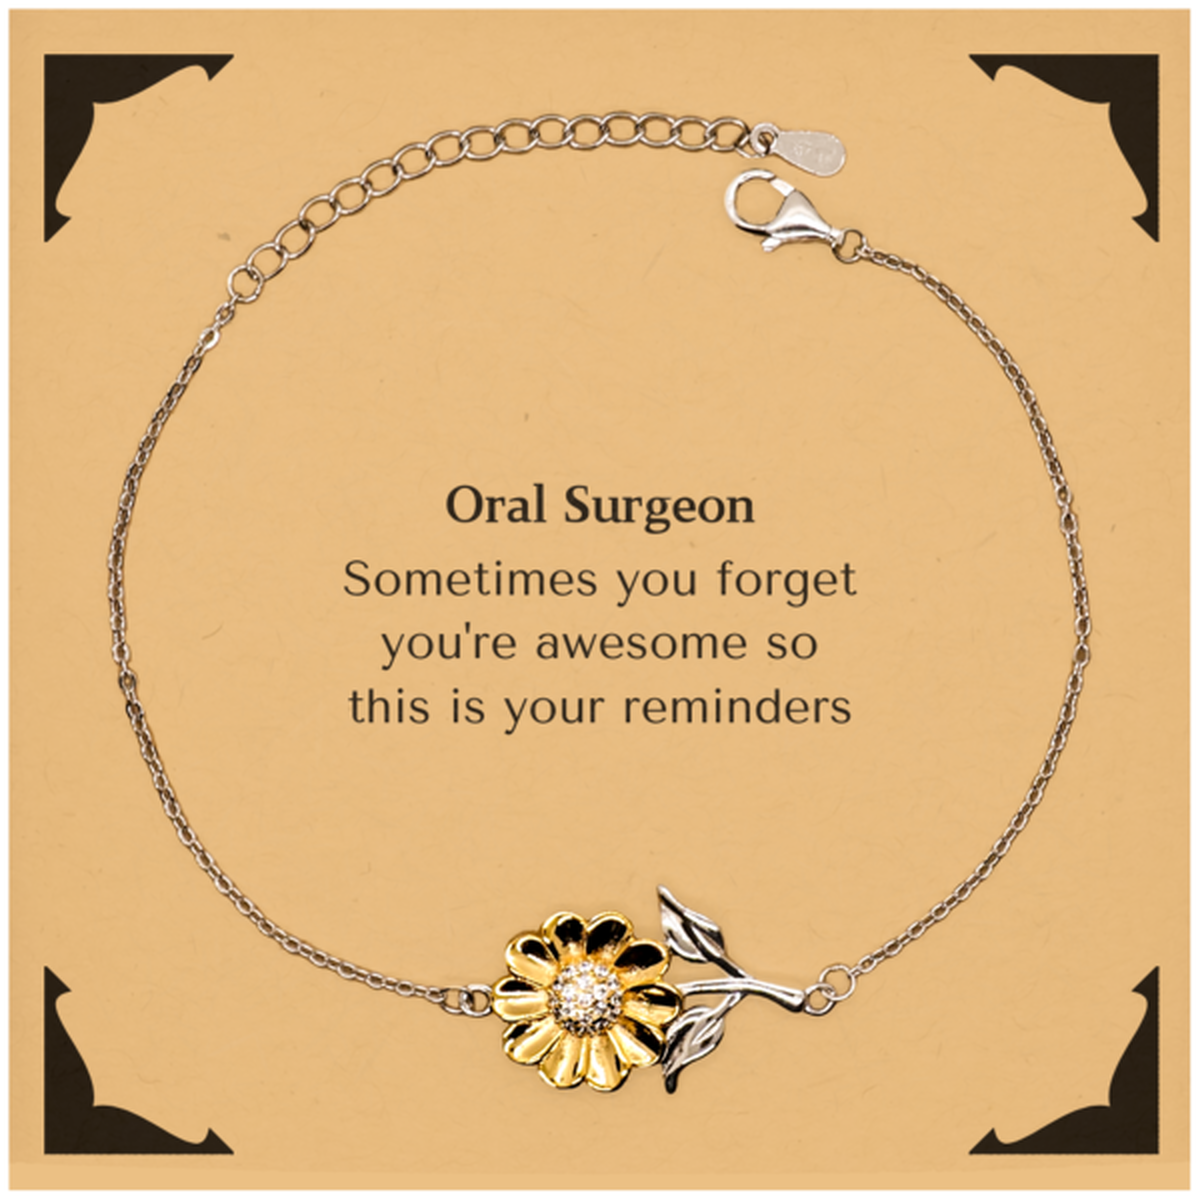 Sentimental Oral Surgeon Sunflower Bracelet, Oral Surgeon Sometimes you forget you're awesome so this is your reminders, Graduation Christmas Birthday Gifts for Oral Surgeon, Men, Women, Coworkers